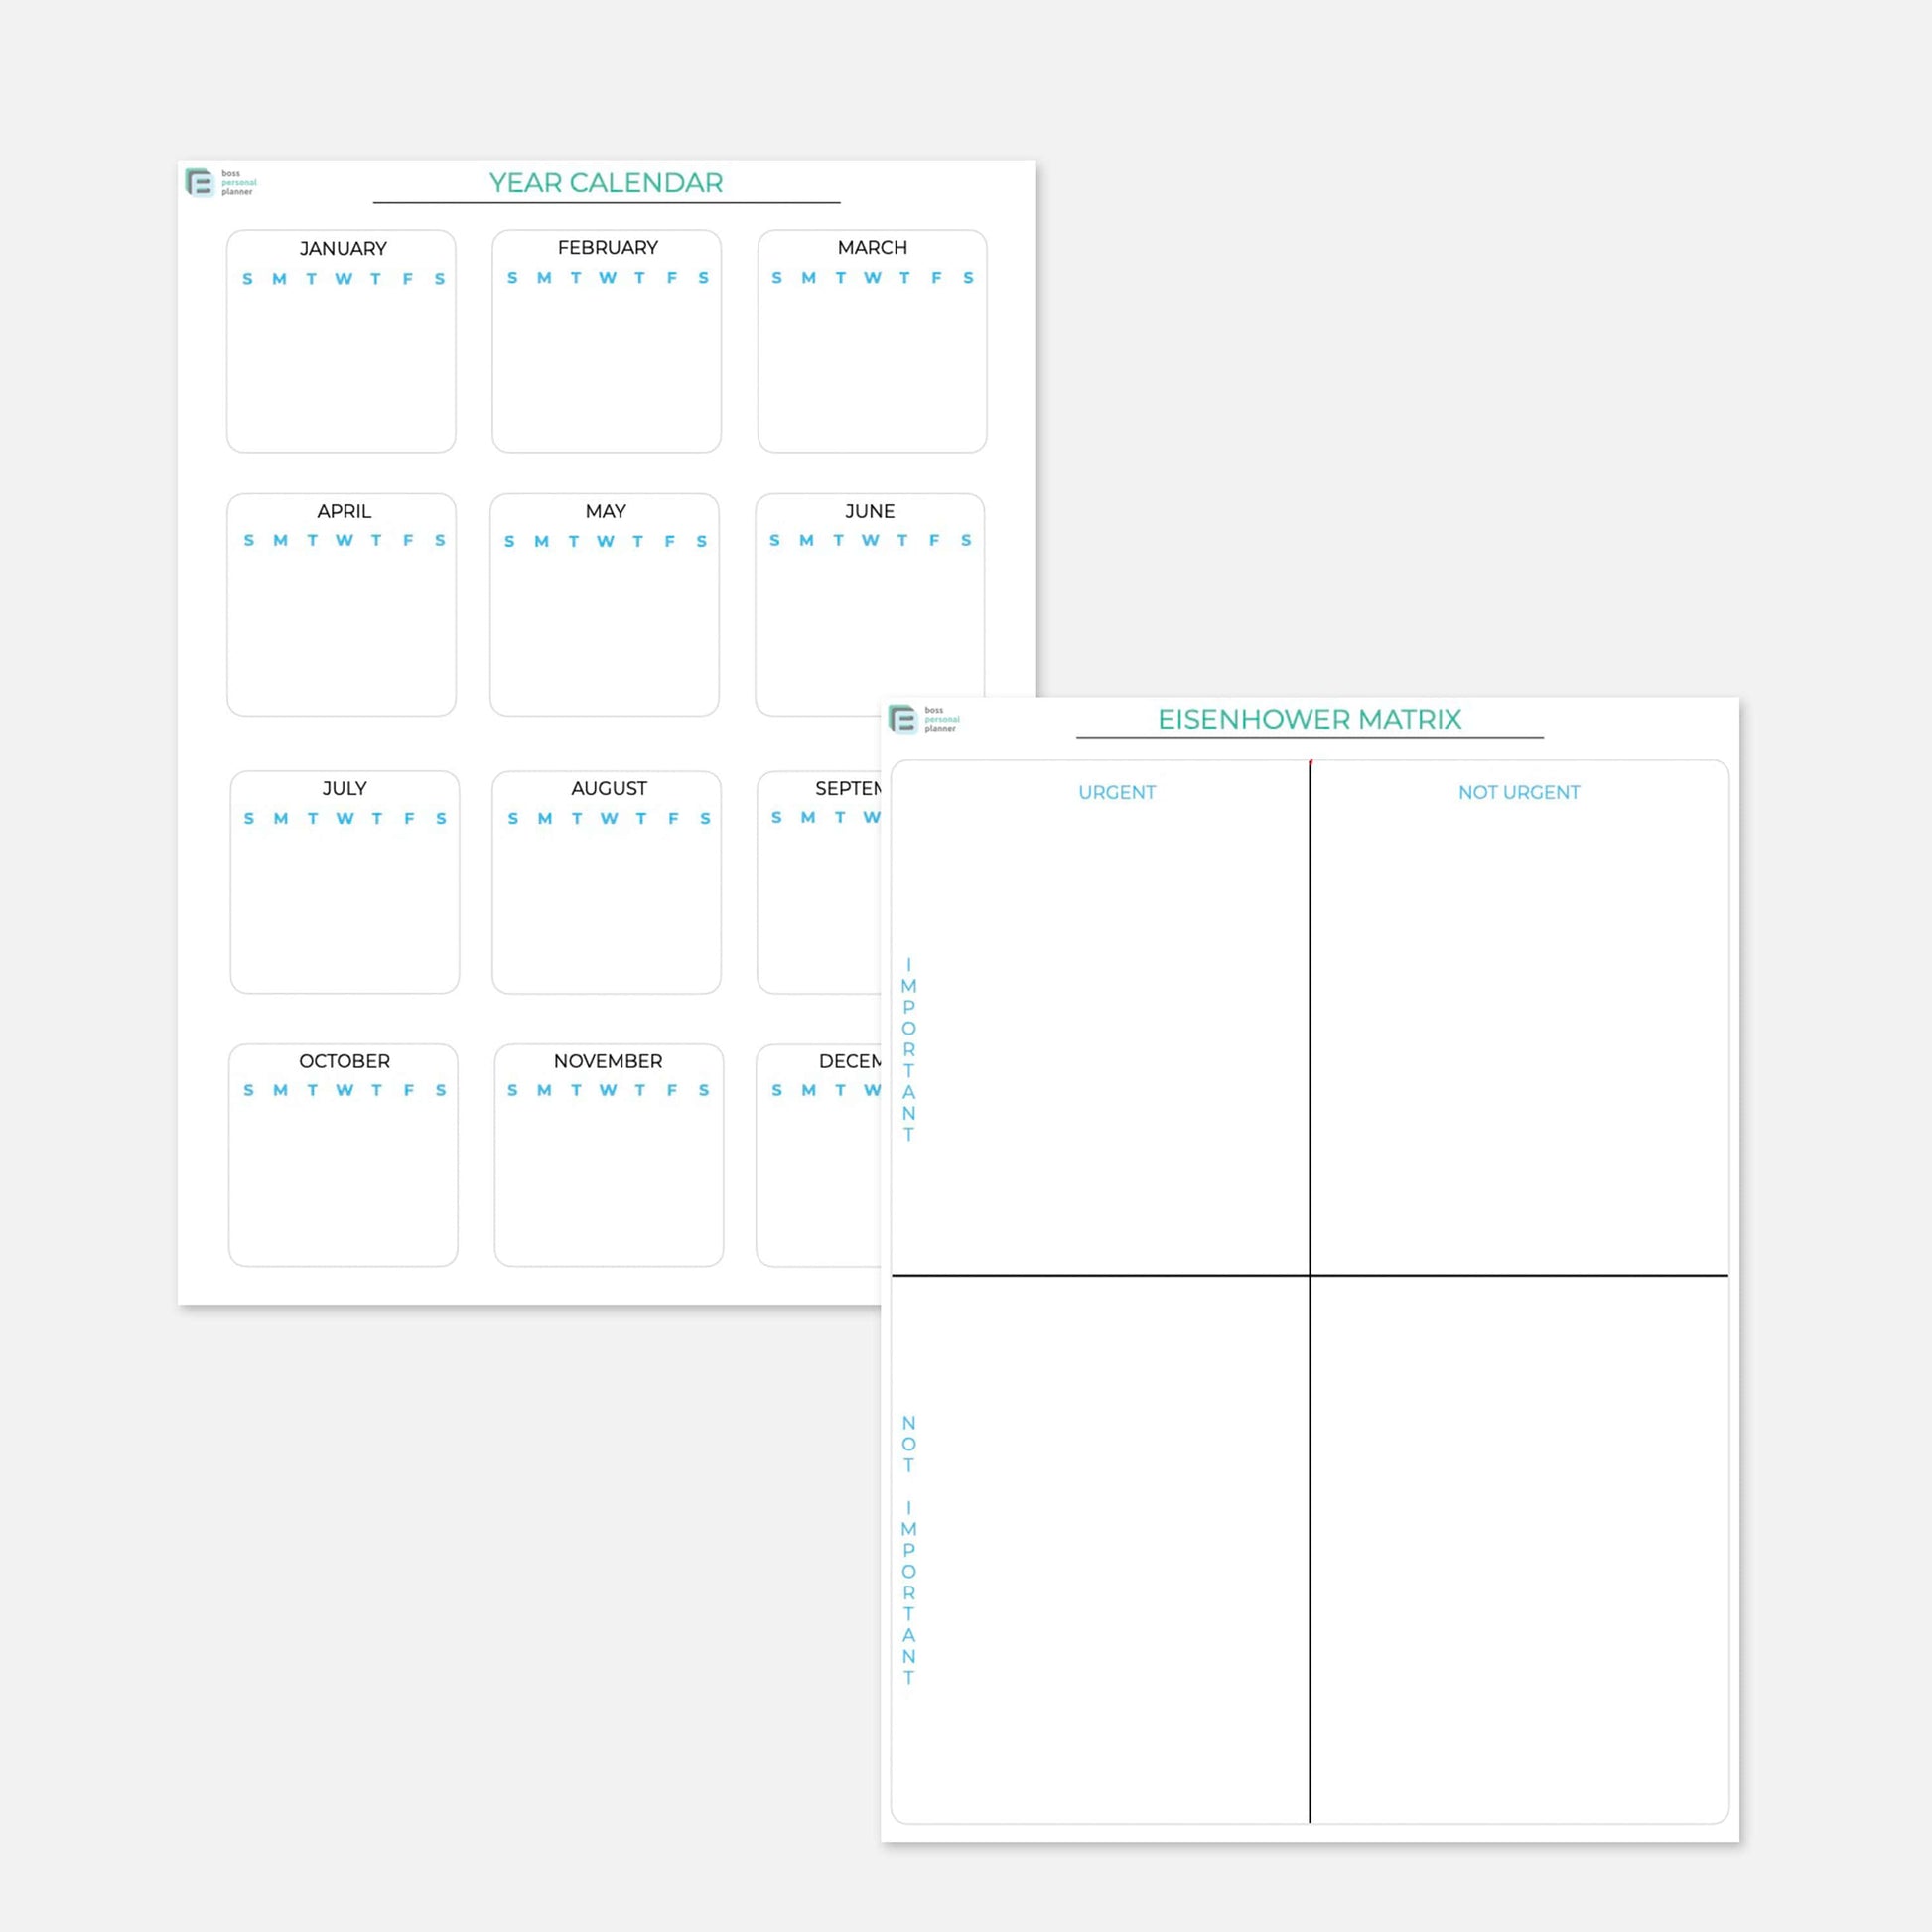 Budget Planner to Print in French Monthly Financial Follow-up, Possibility  of Using It With Goodnotes A4 Format, Budget Planner 